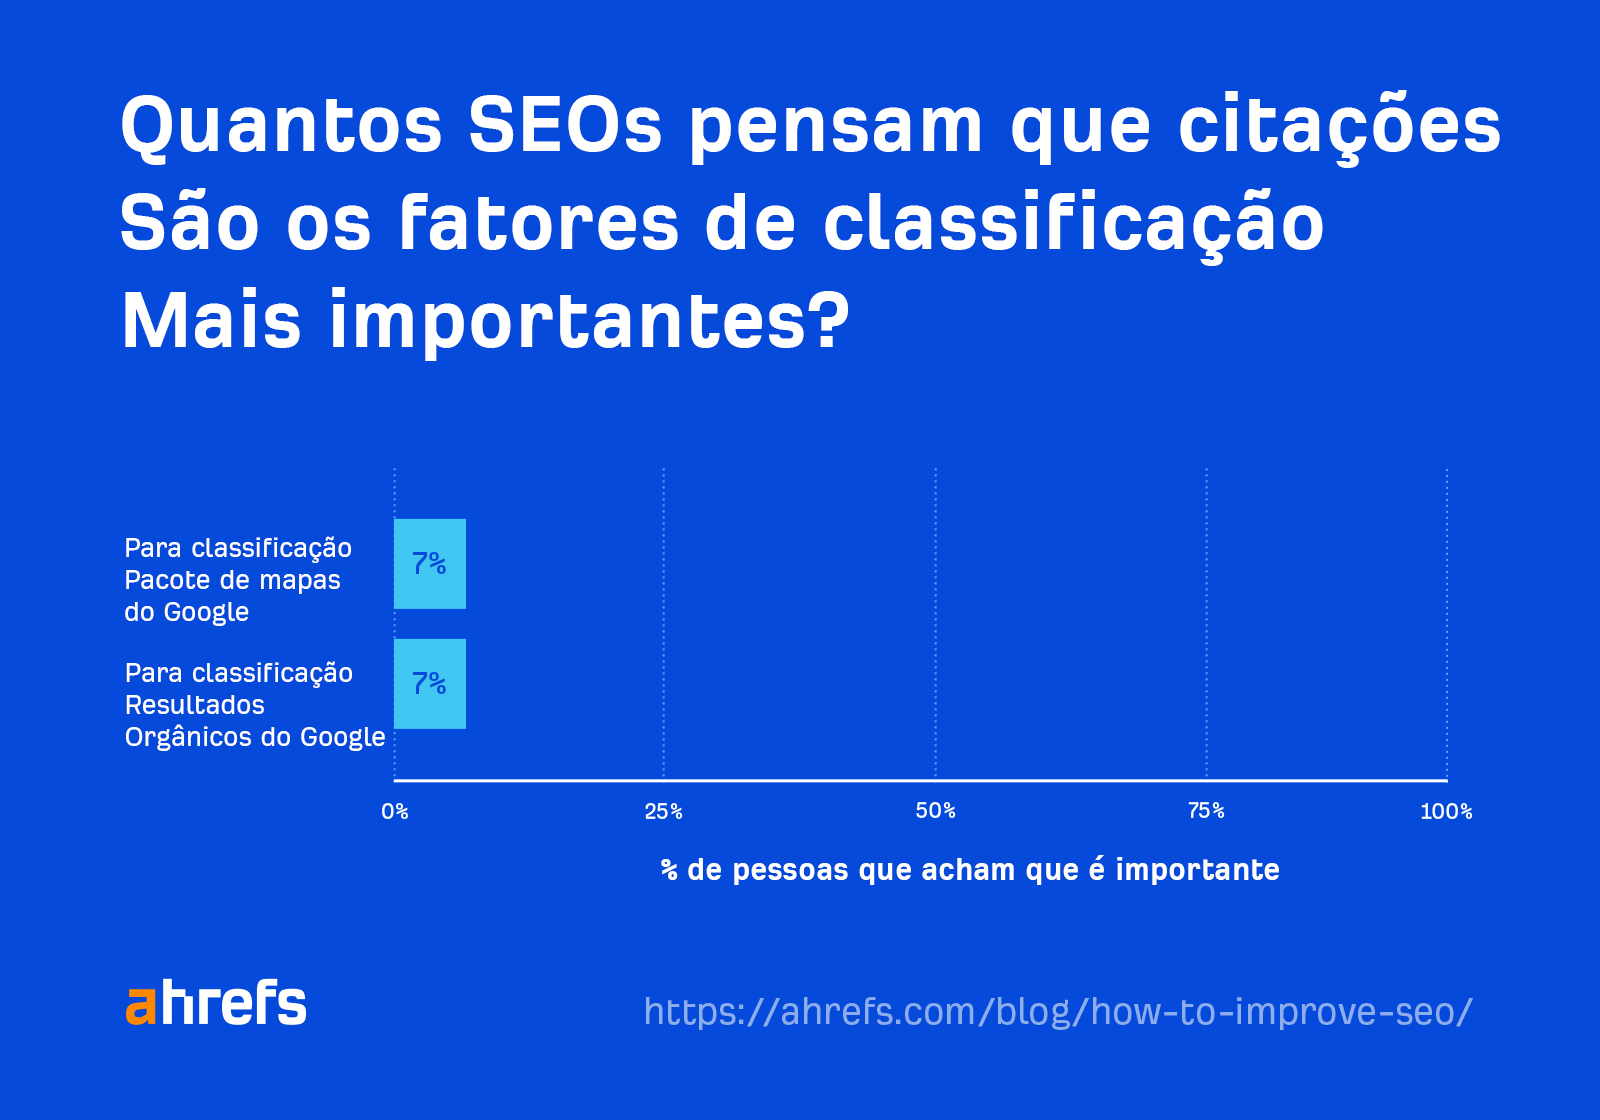 A poll for how many SEOs think citations are the most important ranking factor